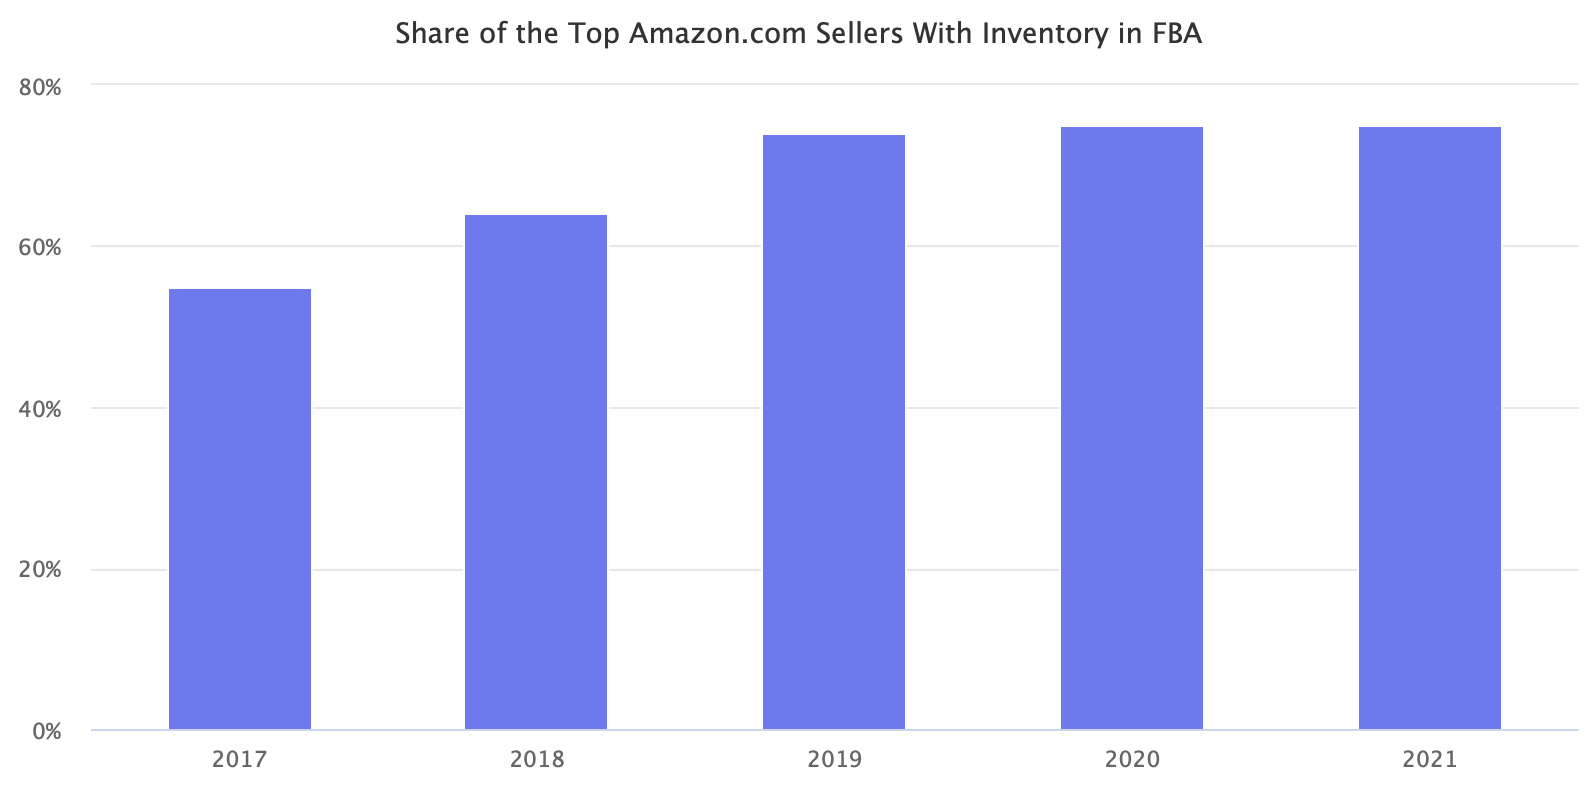 Share of the Top Amazon.com Sellers With Inventory in FBA